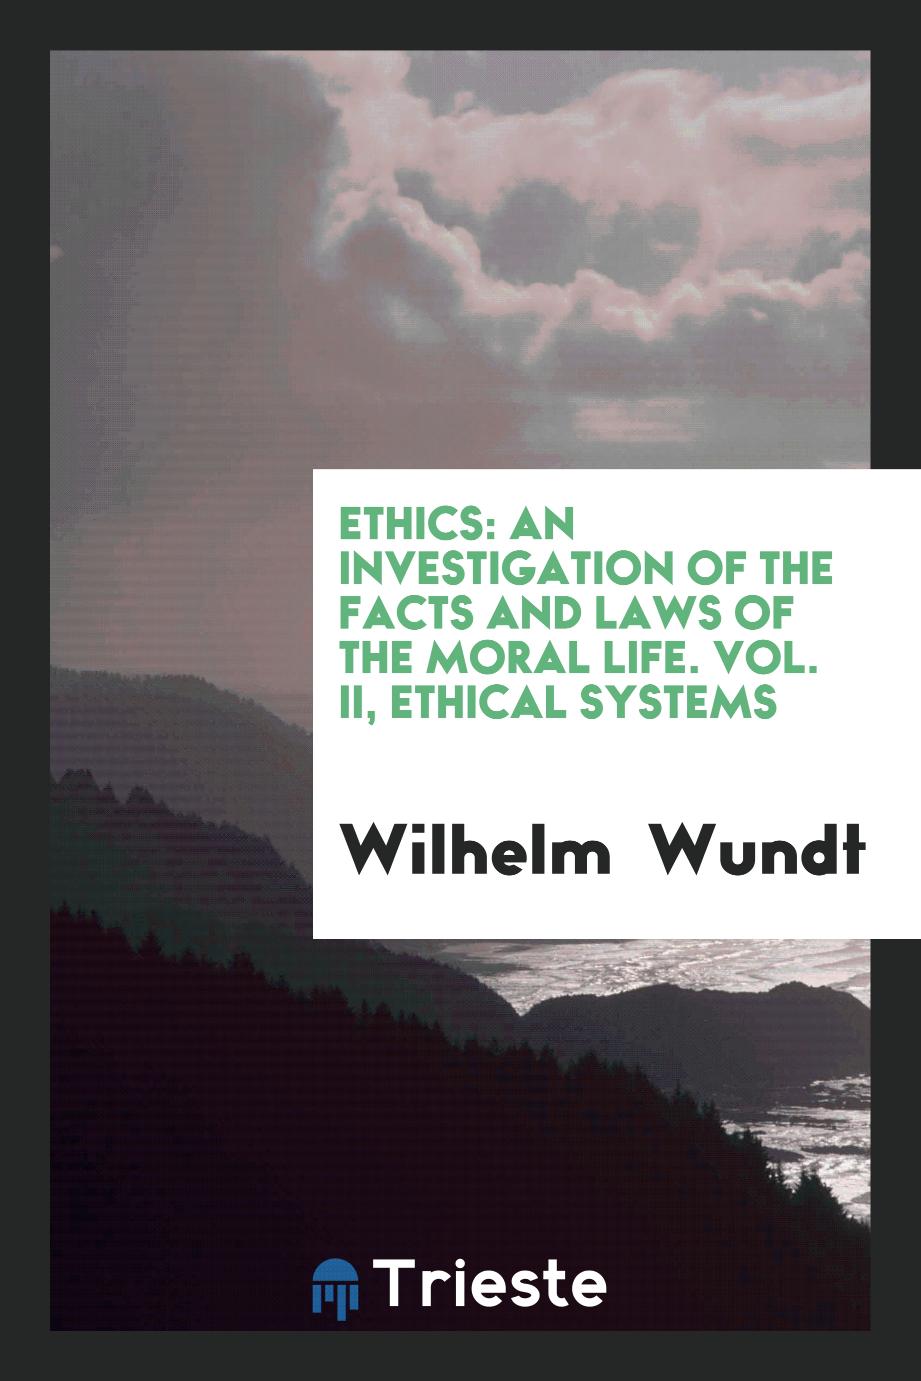 Ethics: an investigation of the facts and laws of the moral life. Vol. II, Ethical Systems